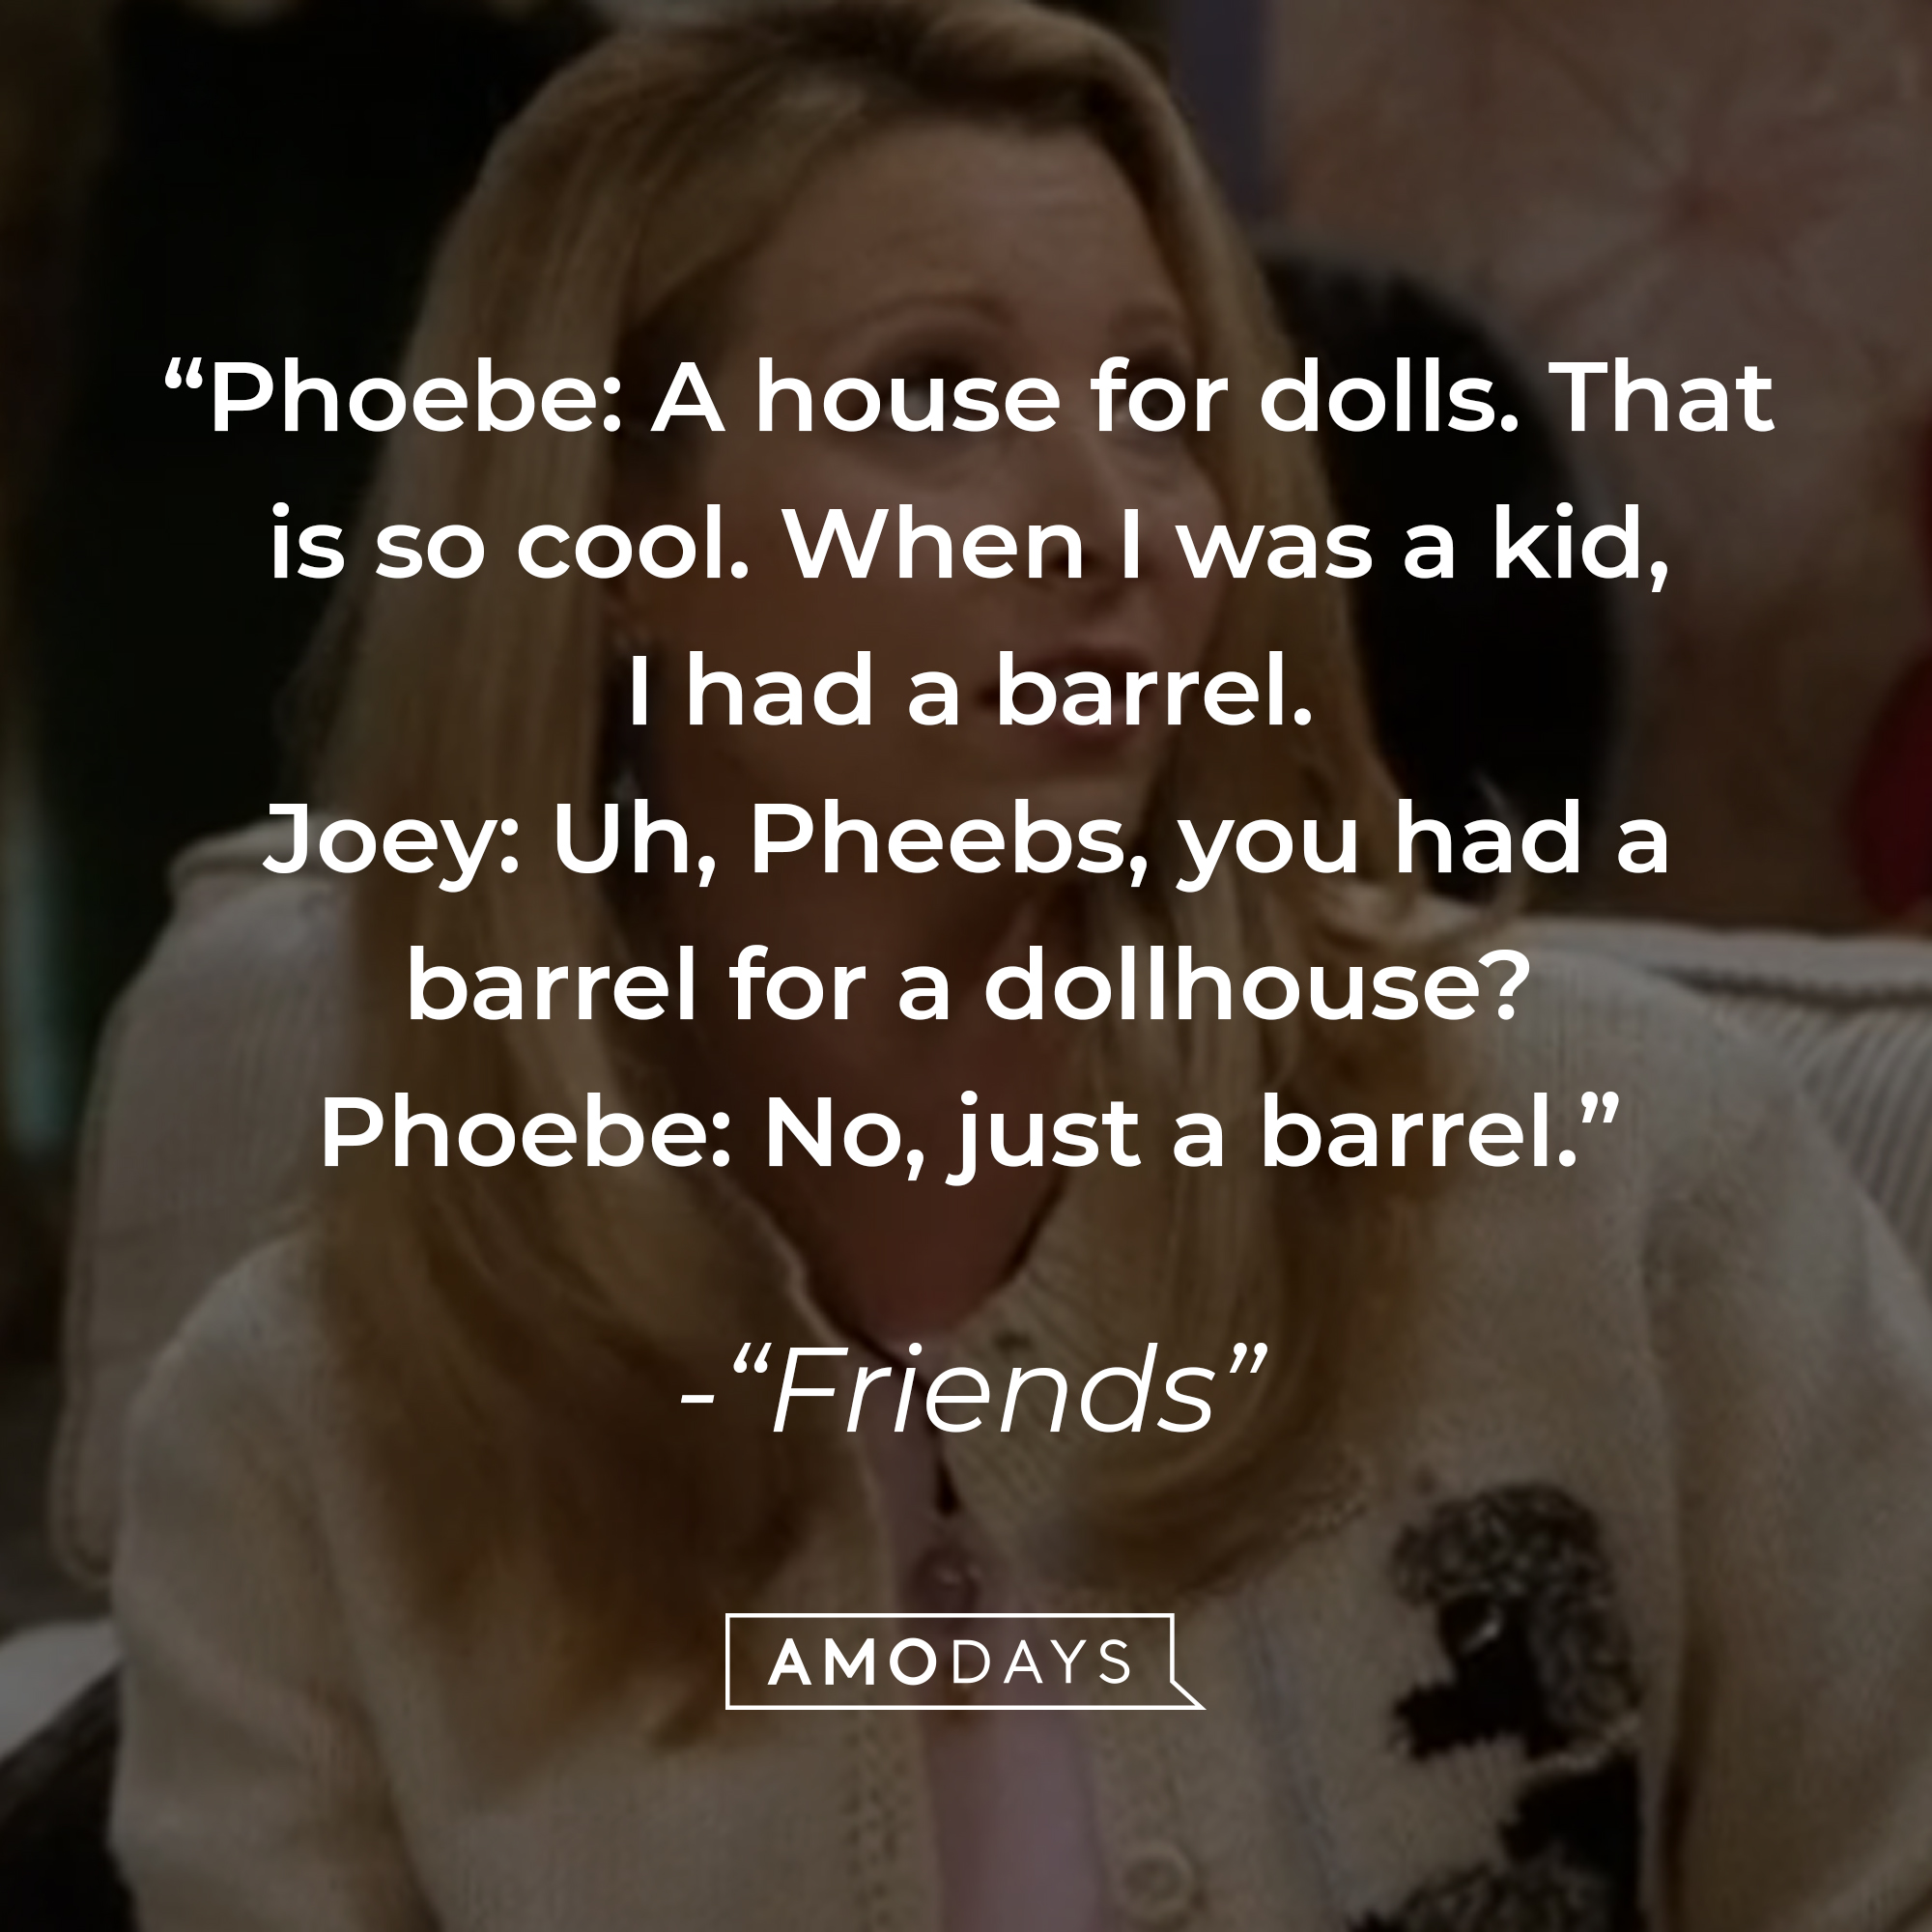 Quote from "Friends" TV show: "Phoebe: A house for dolls. That is so cool. When I was a kid, I had a barrel. Joey: Uh, Pheebs, you had a barrel for a dollhouse? Phoebe: No, just a barrel." | Source: Facebook.com/friends.tv